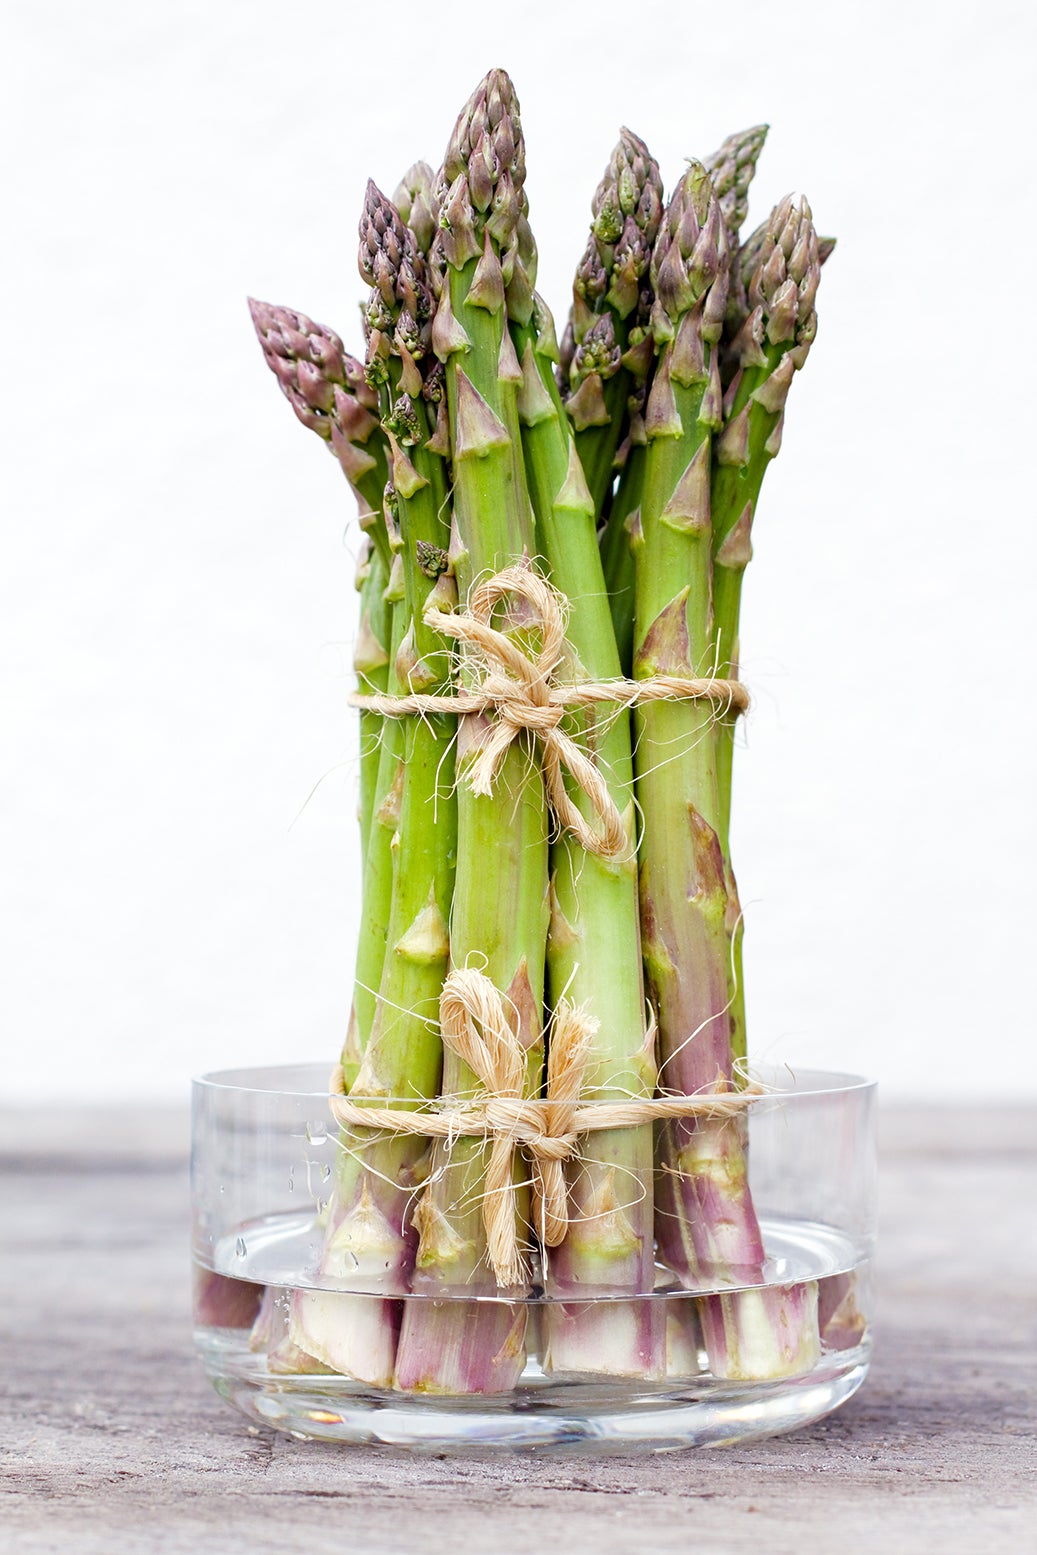 Reinvigorate sad asparagus by trimming the ends and placing upright in water